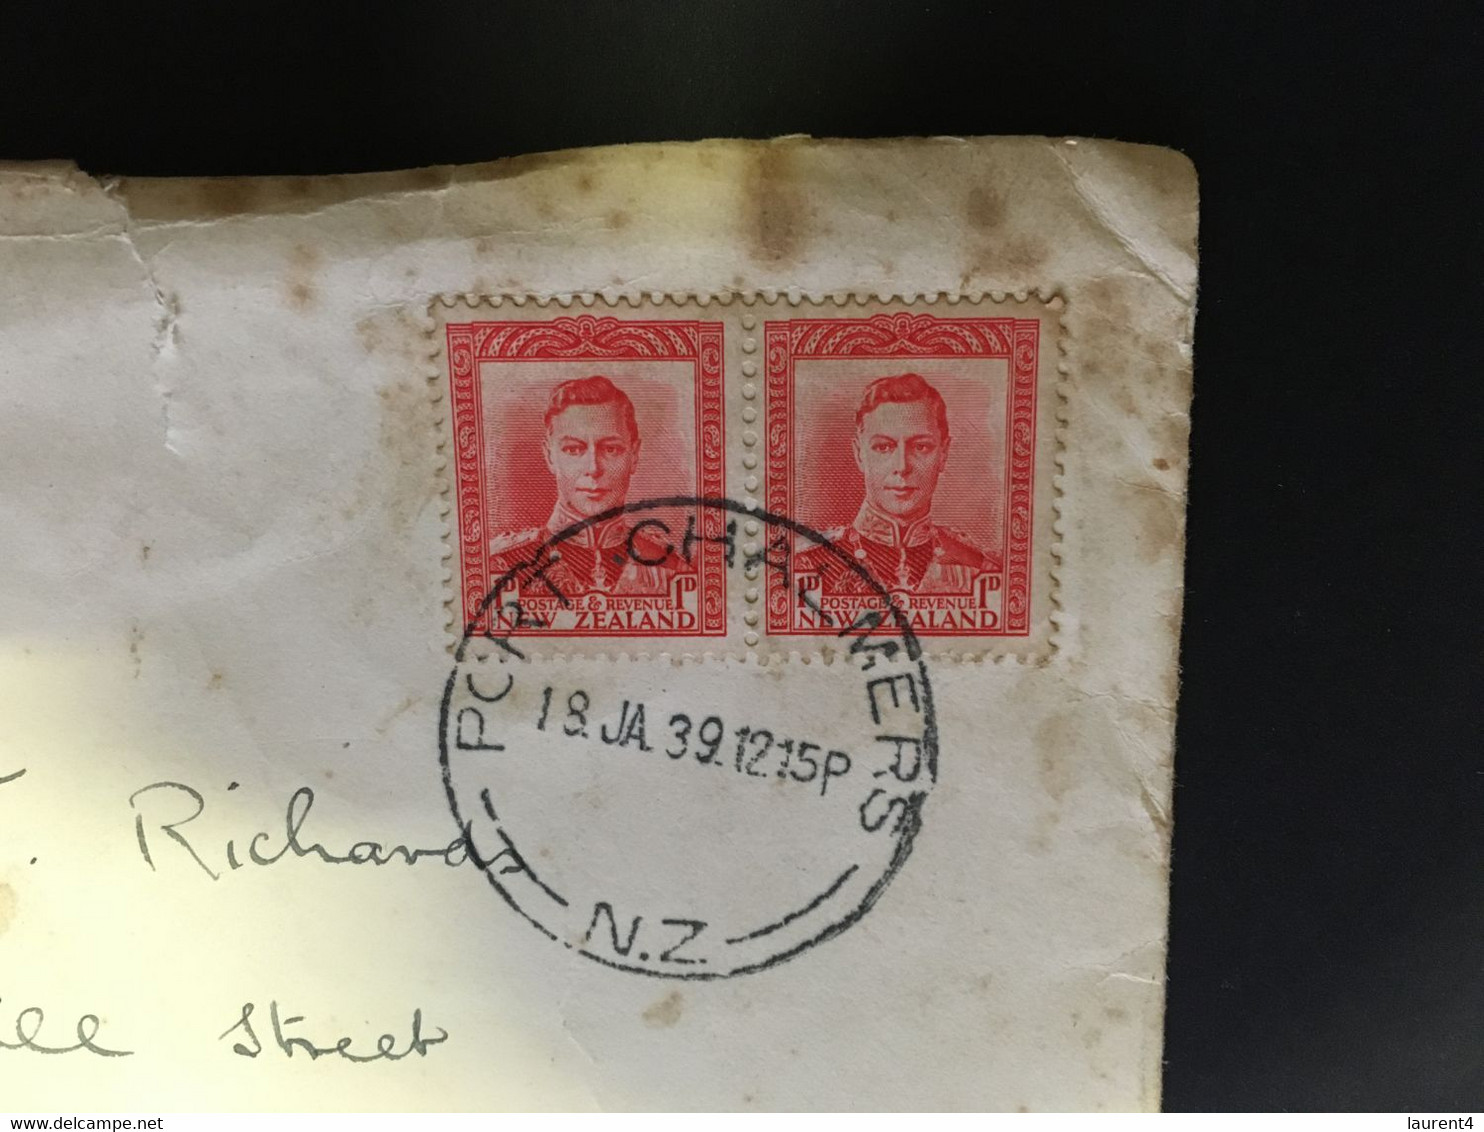 (OO 4) New Zealand Ship RMS Wanganella) Cover Posted To Australia (1939) - Covers & Documents